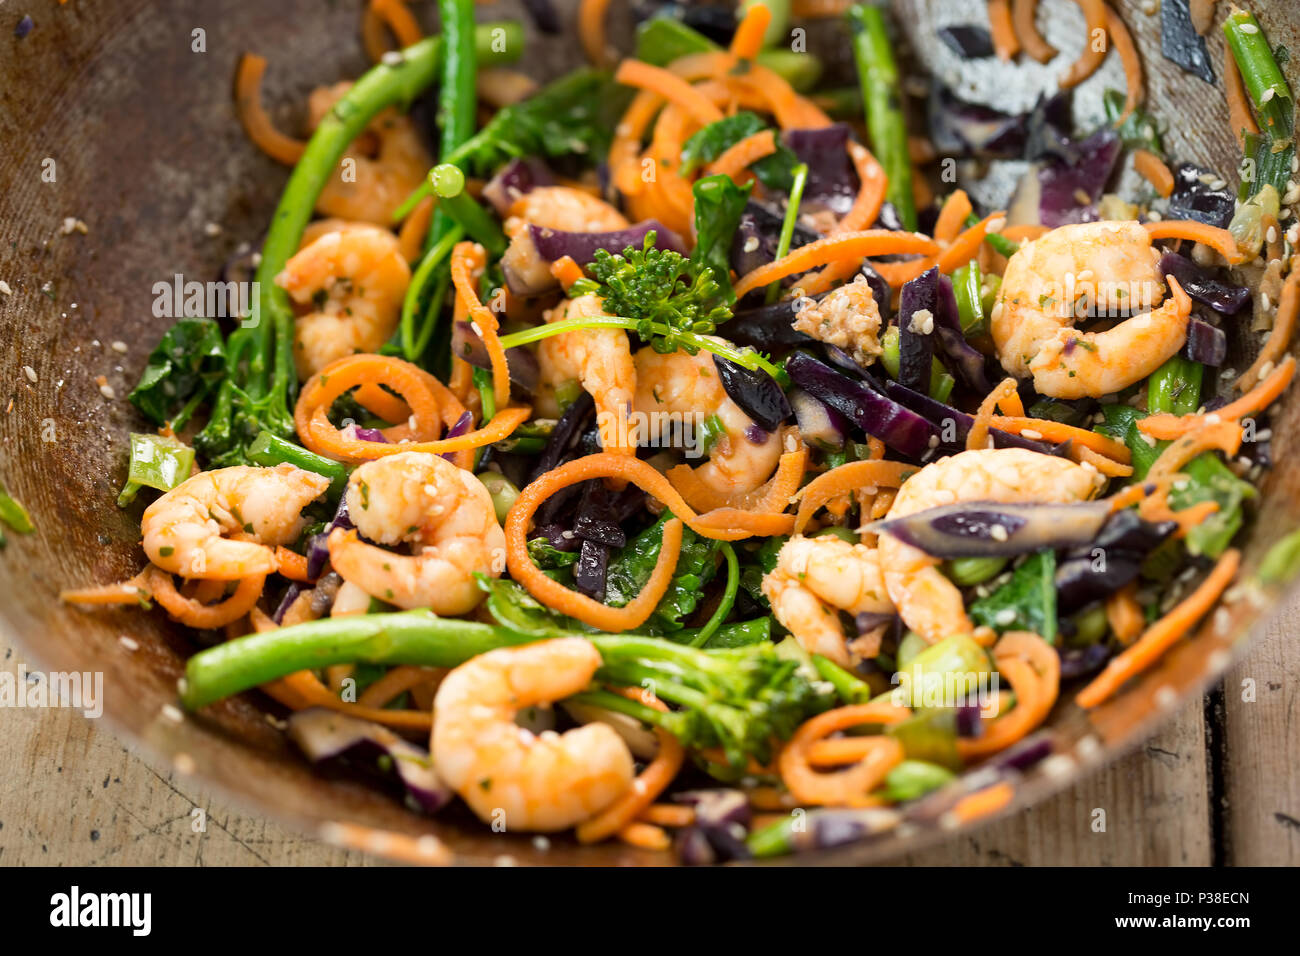 Stir fry with carrots, red cabbage, broccoli, kale, edamame, spring onions, seeds & prawns Stock Photo